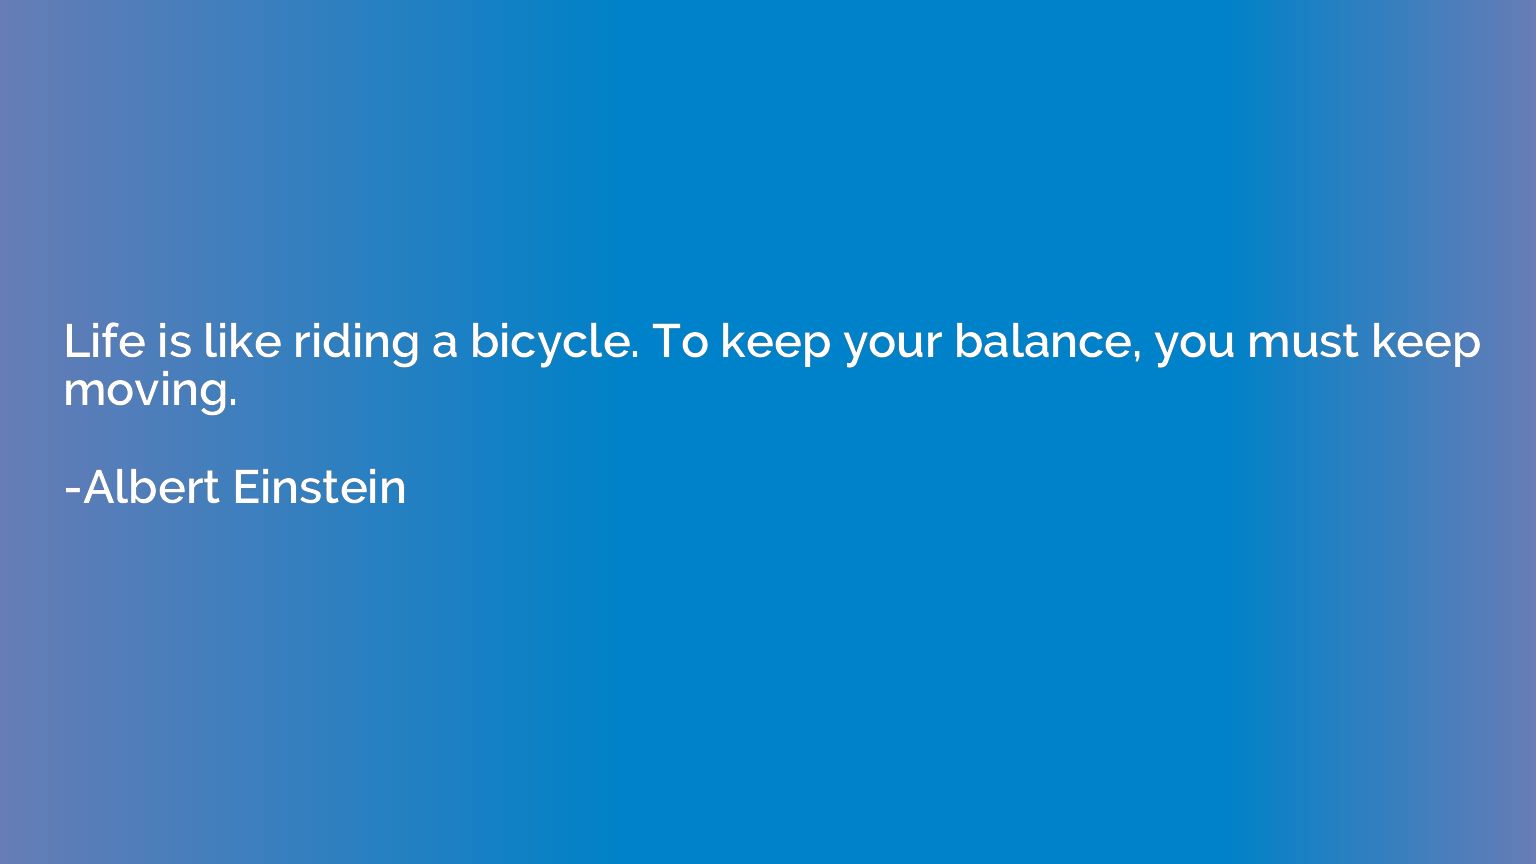 Life is like riding a bicycle. To keep your balance, you mus